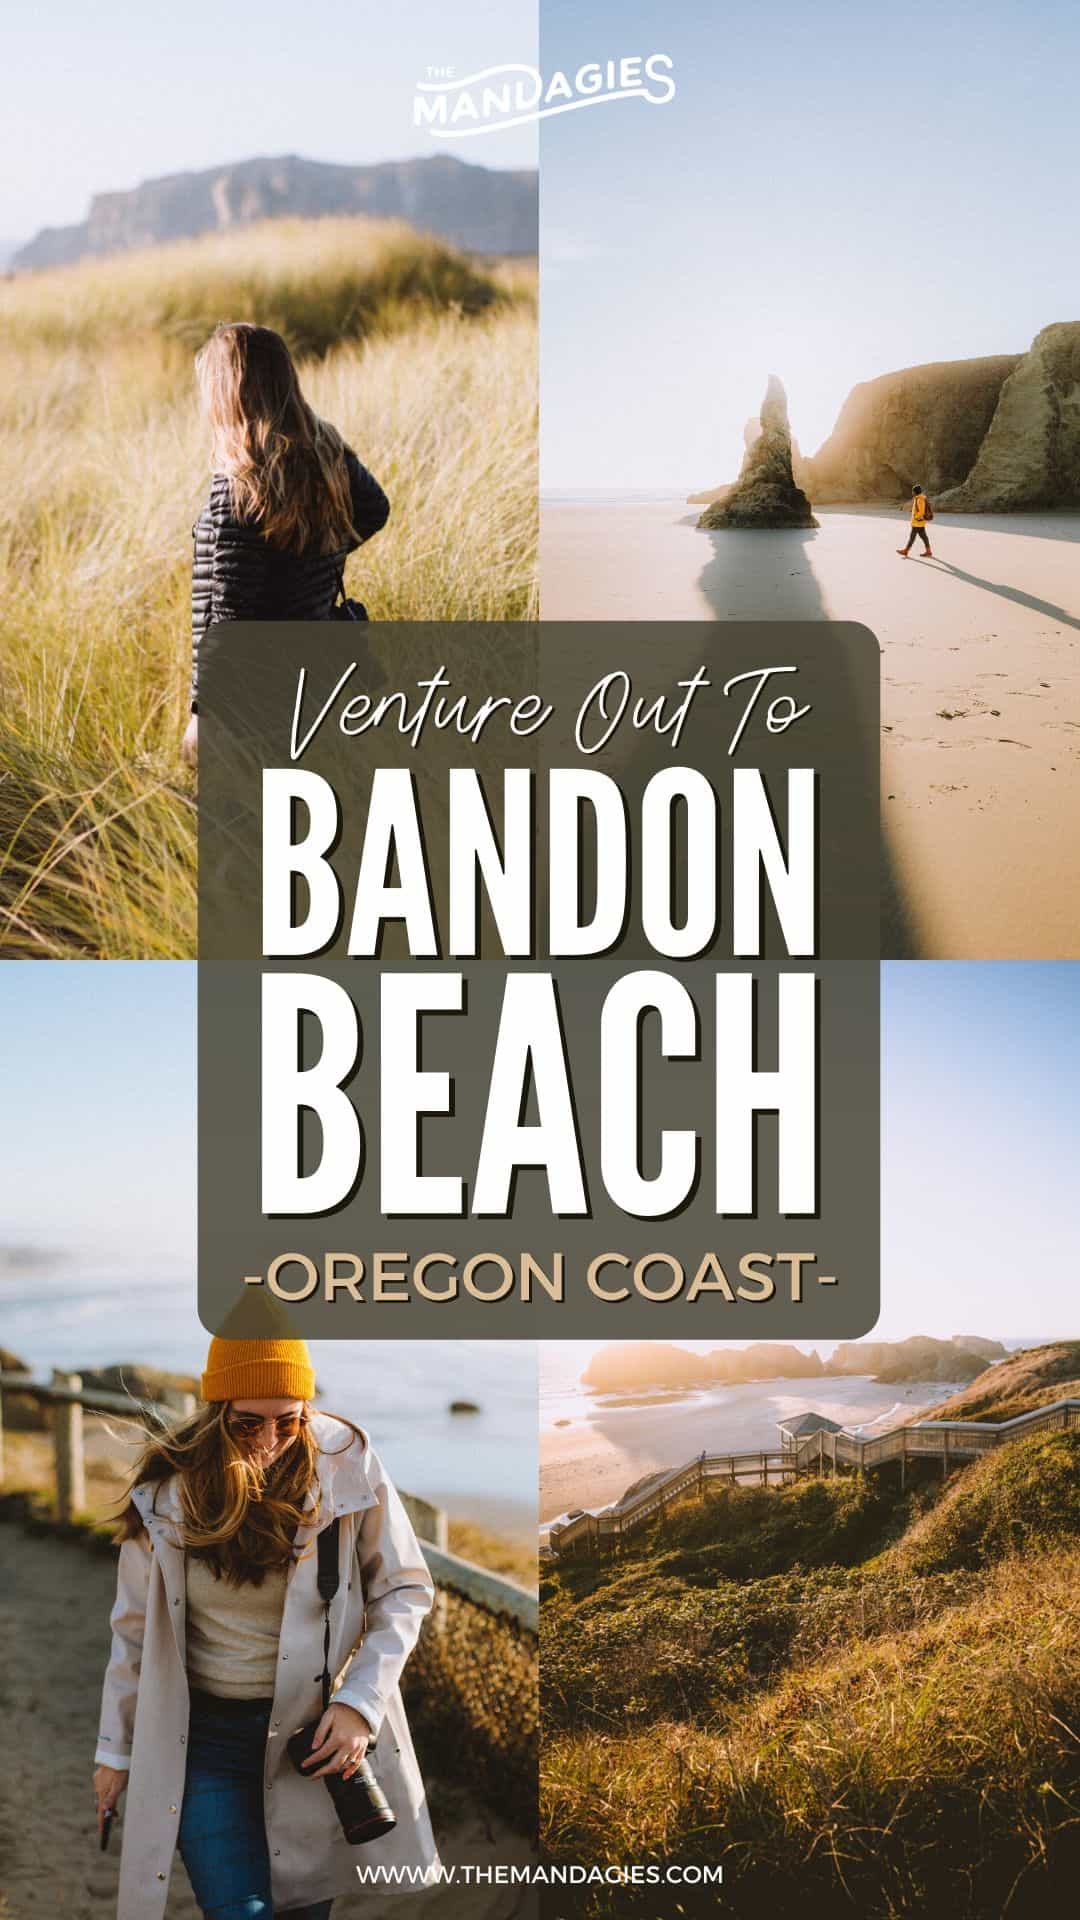 Face Rock State Scenic Viewpoint In Bandon, OR is home to some of the most iconic sea stacks in the state! We're taking you on a tour of them all right here, including our favorite stops on an Oregon coast road trip, photography tips, and more! #oregon #weekendgetaway #oregoncoast #bandonbeach #summer #sunset #photography #westcoast #PNW #pacificnorthwest #pacificocean #oregon #bandonoregon